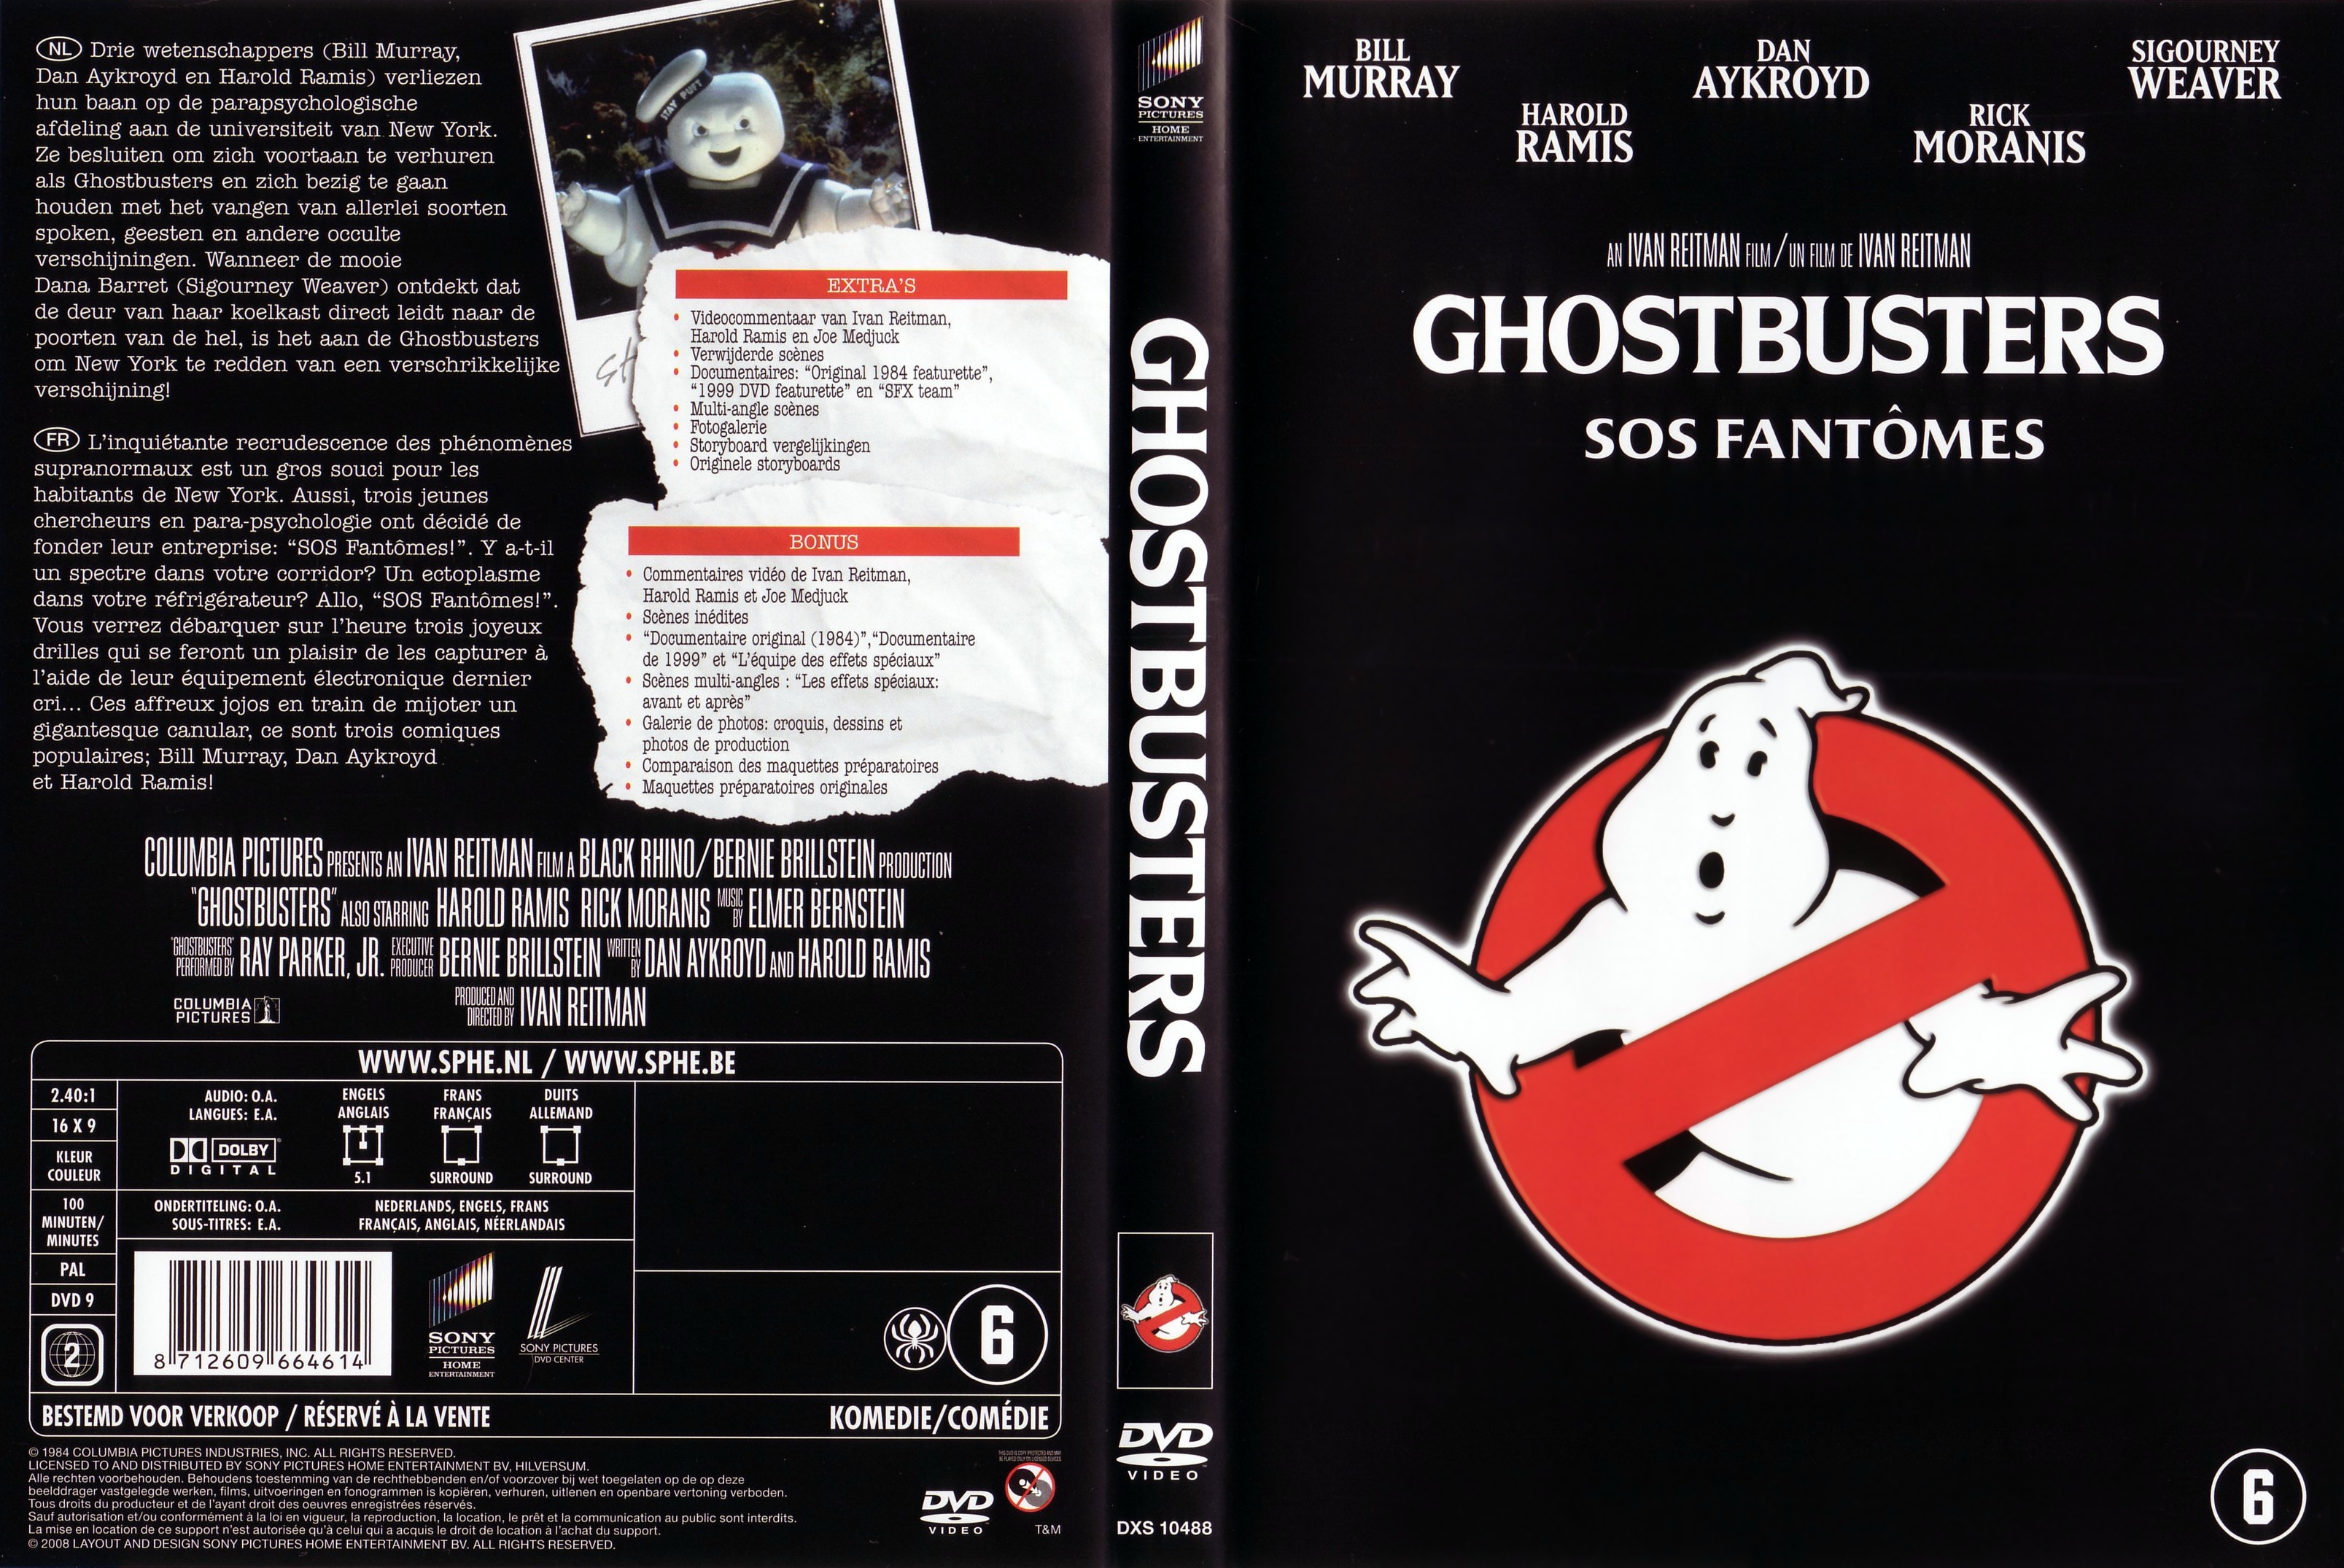 Jaquette DVD SOS Fantomes - Ghostbusters